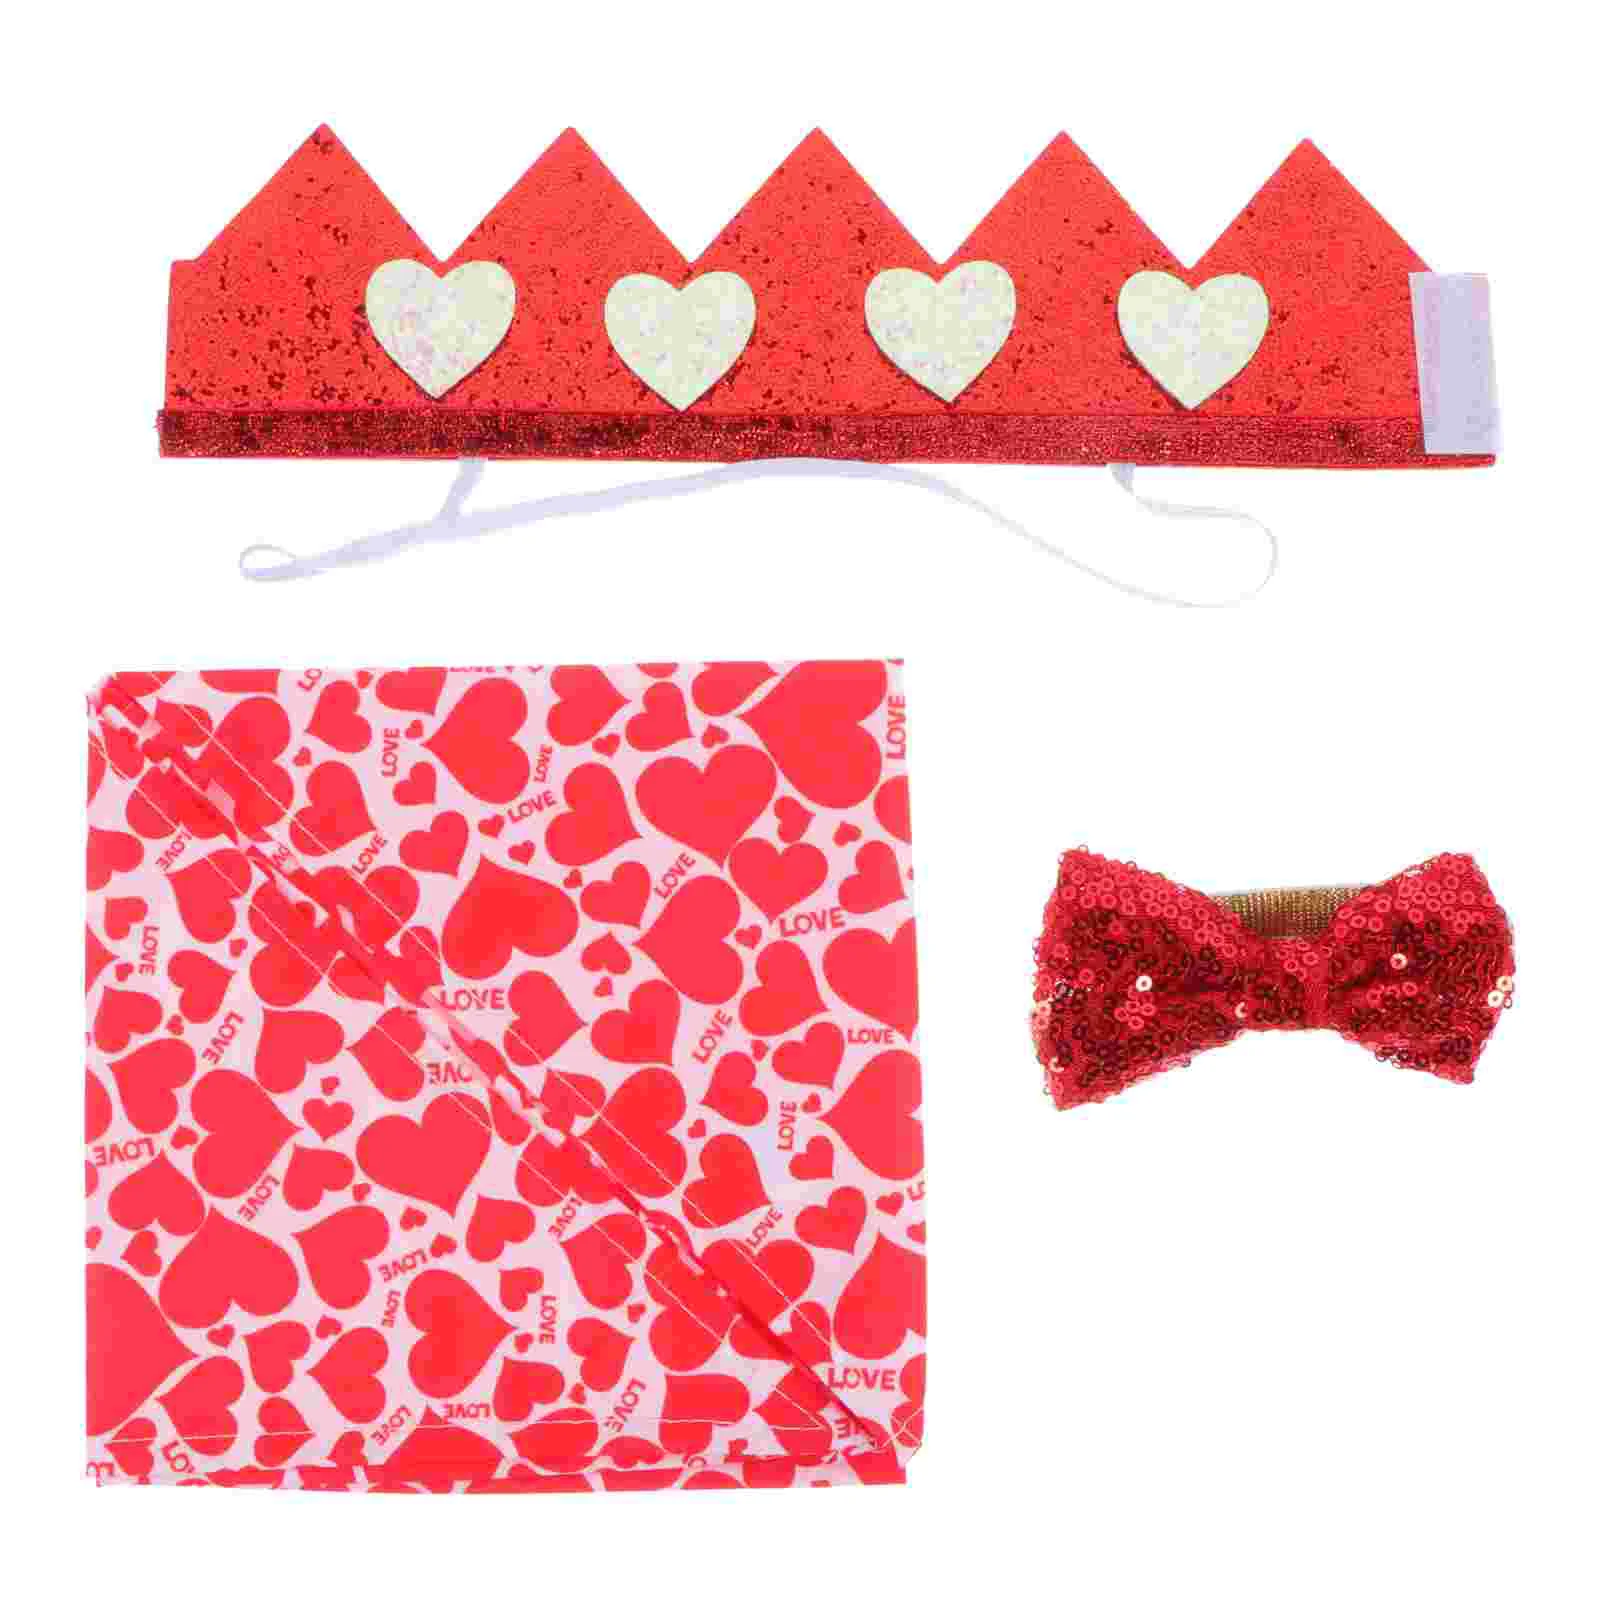 

Pet Valentine Day S Dog Party Pets Saliva Scarf Adorns Hat Bowtie Towels Triangle Ties Puppy Decor Towel Adorable Hats Decors